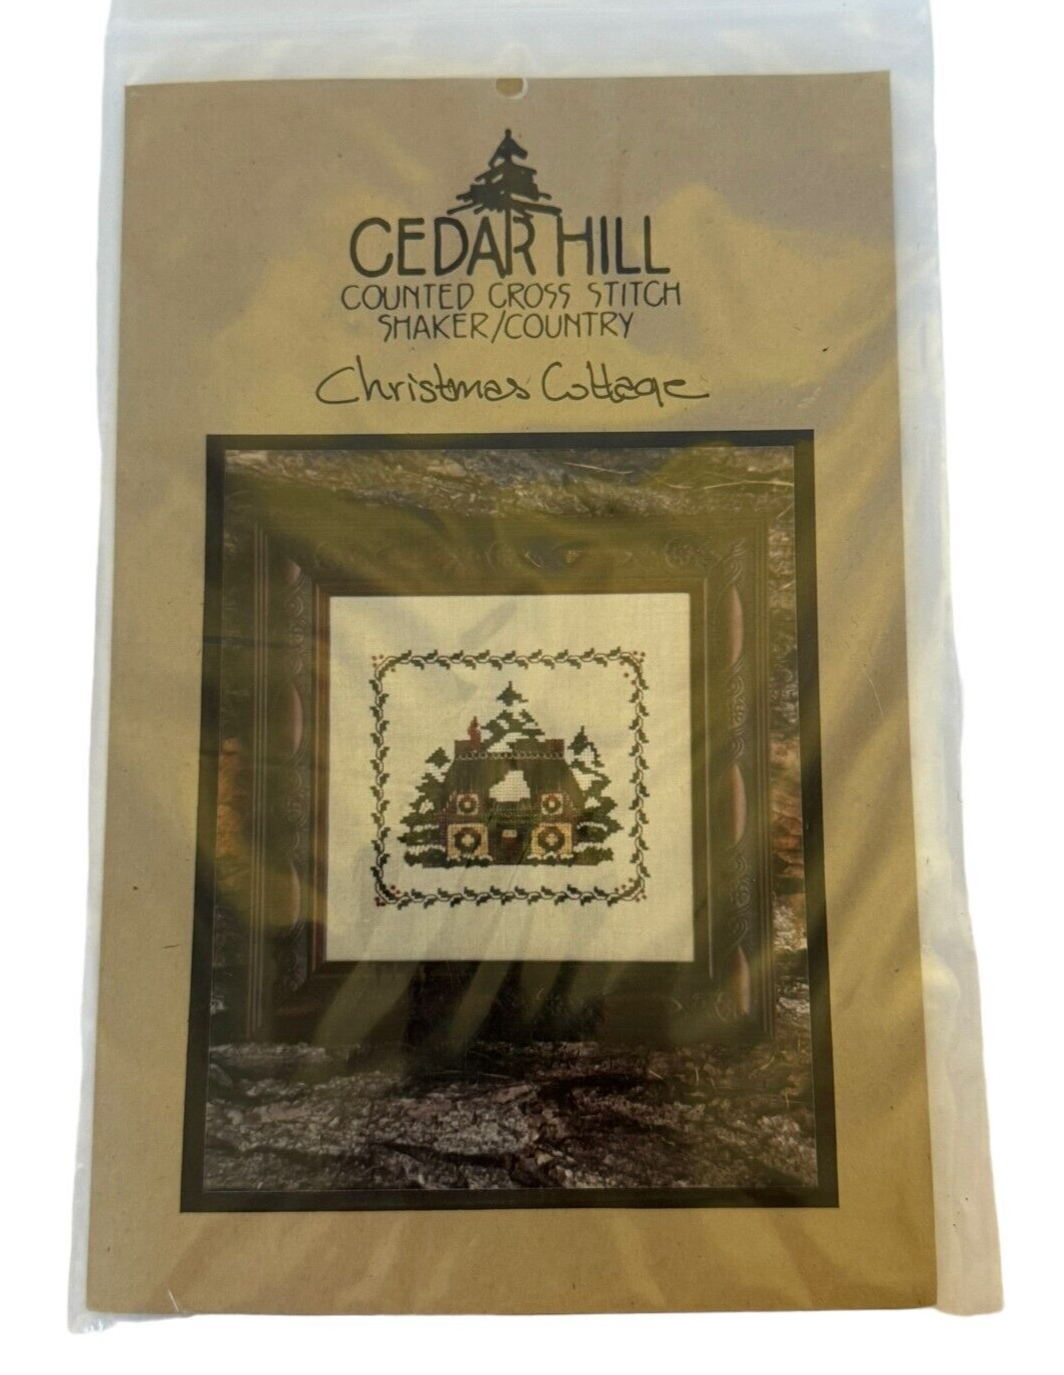 Cedar Hill Counted Cross Stitch Shaker Country Christmas Cottage Pattern Chart - $4.99